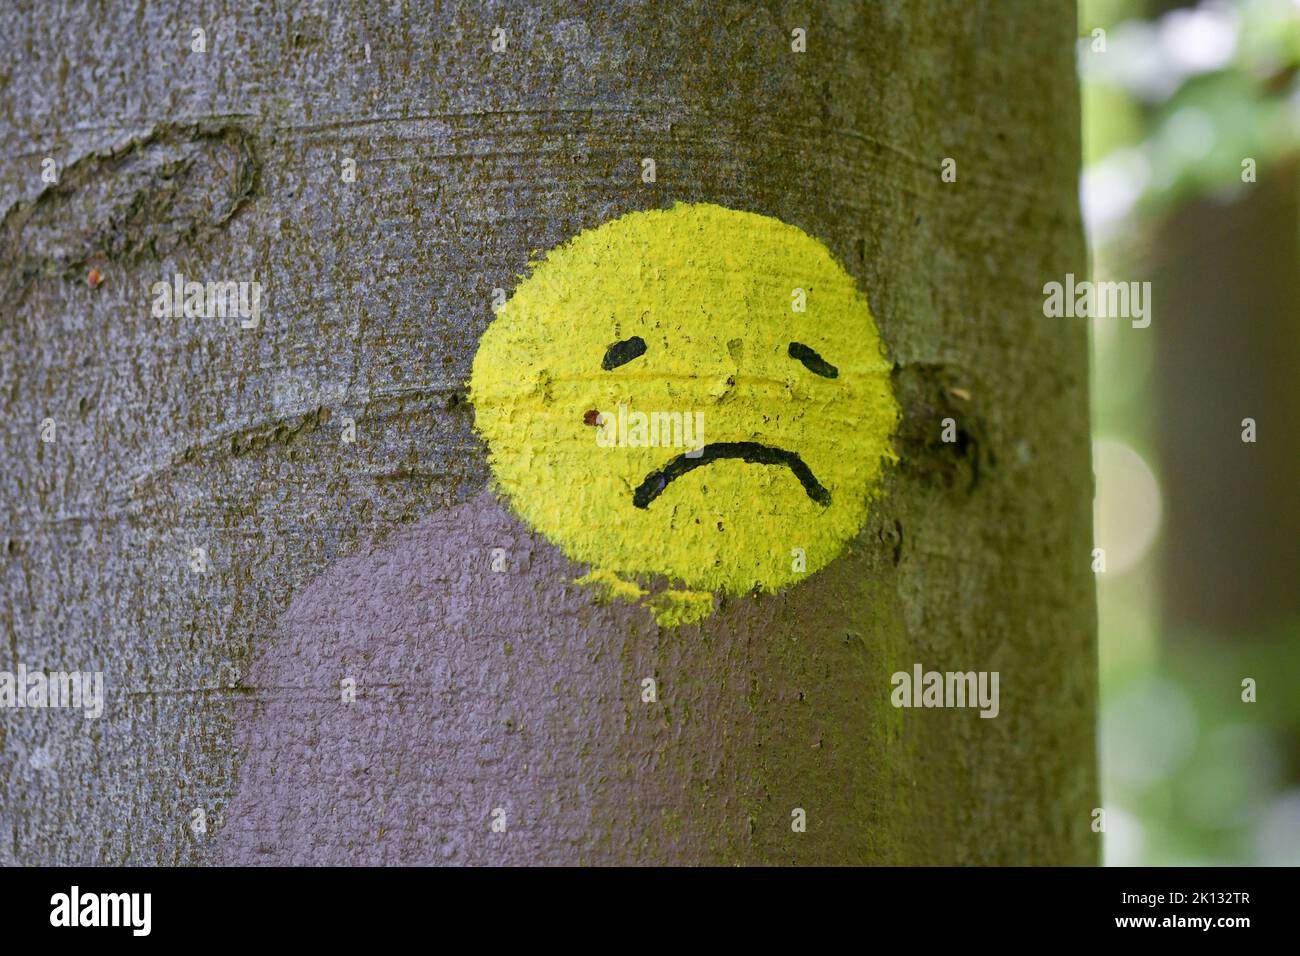 A sad yellow smiley face painted on a tree in nature Stock Photo